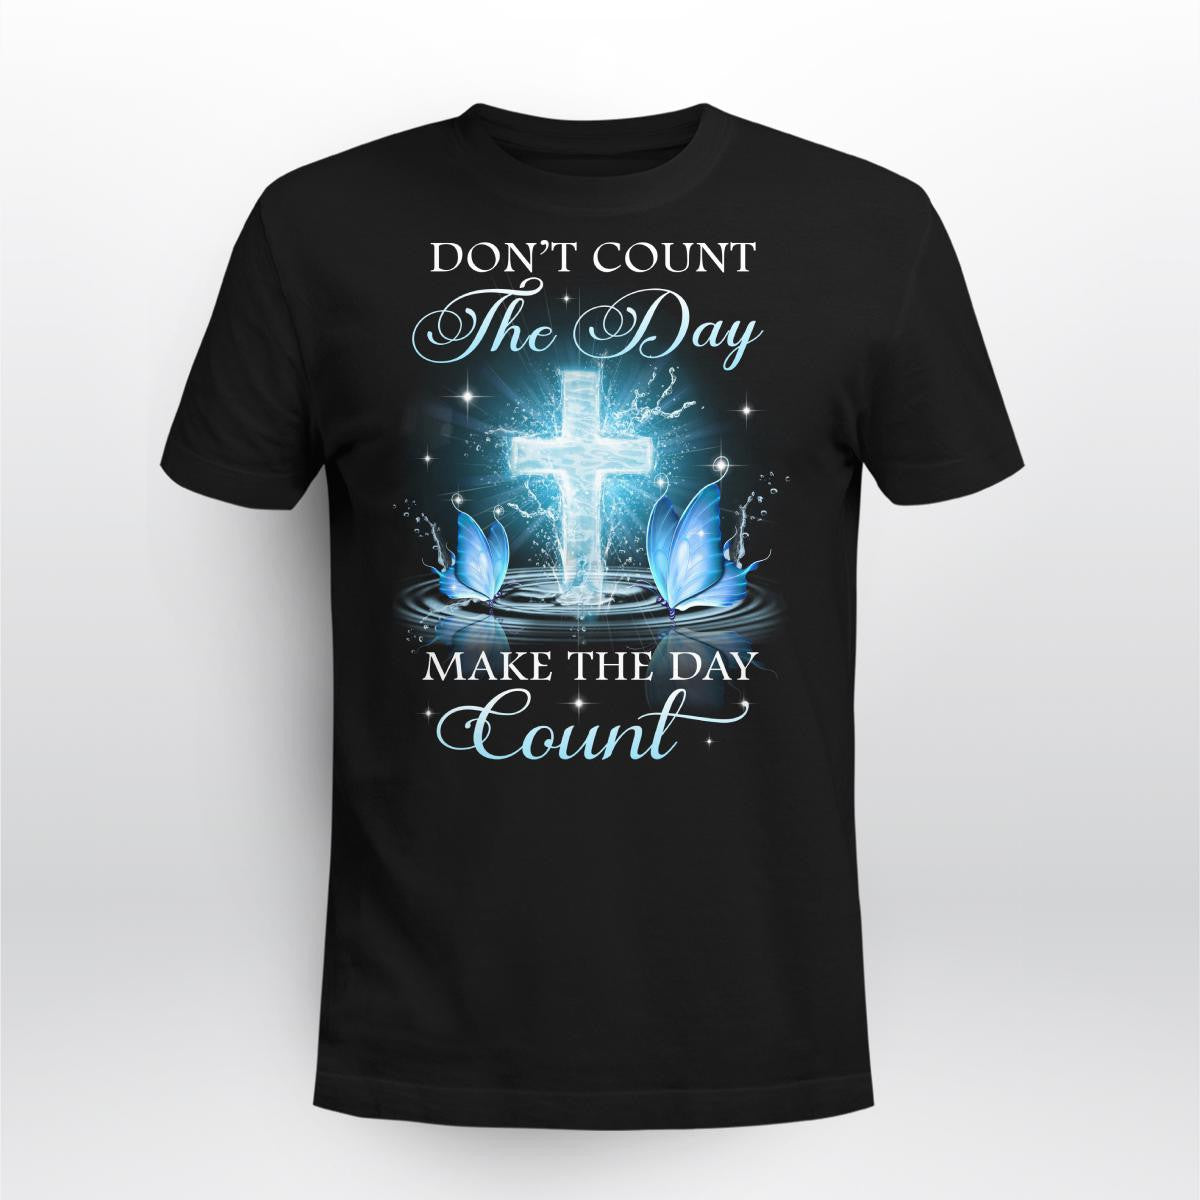 Don't Count The Day Make The Day Count God T-Shirt, Faith T-Shirt, Jesus Sweatshirt, Christ Unisex Hoodie